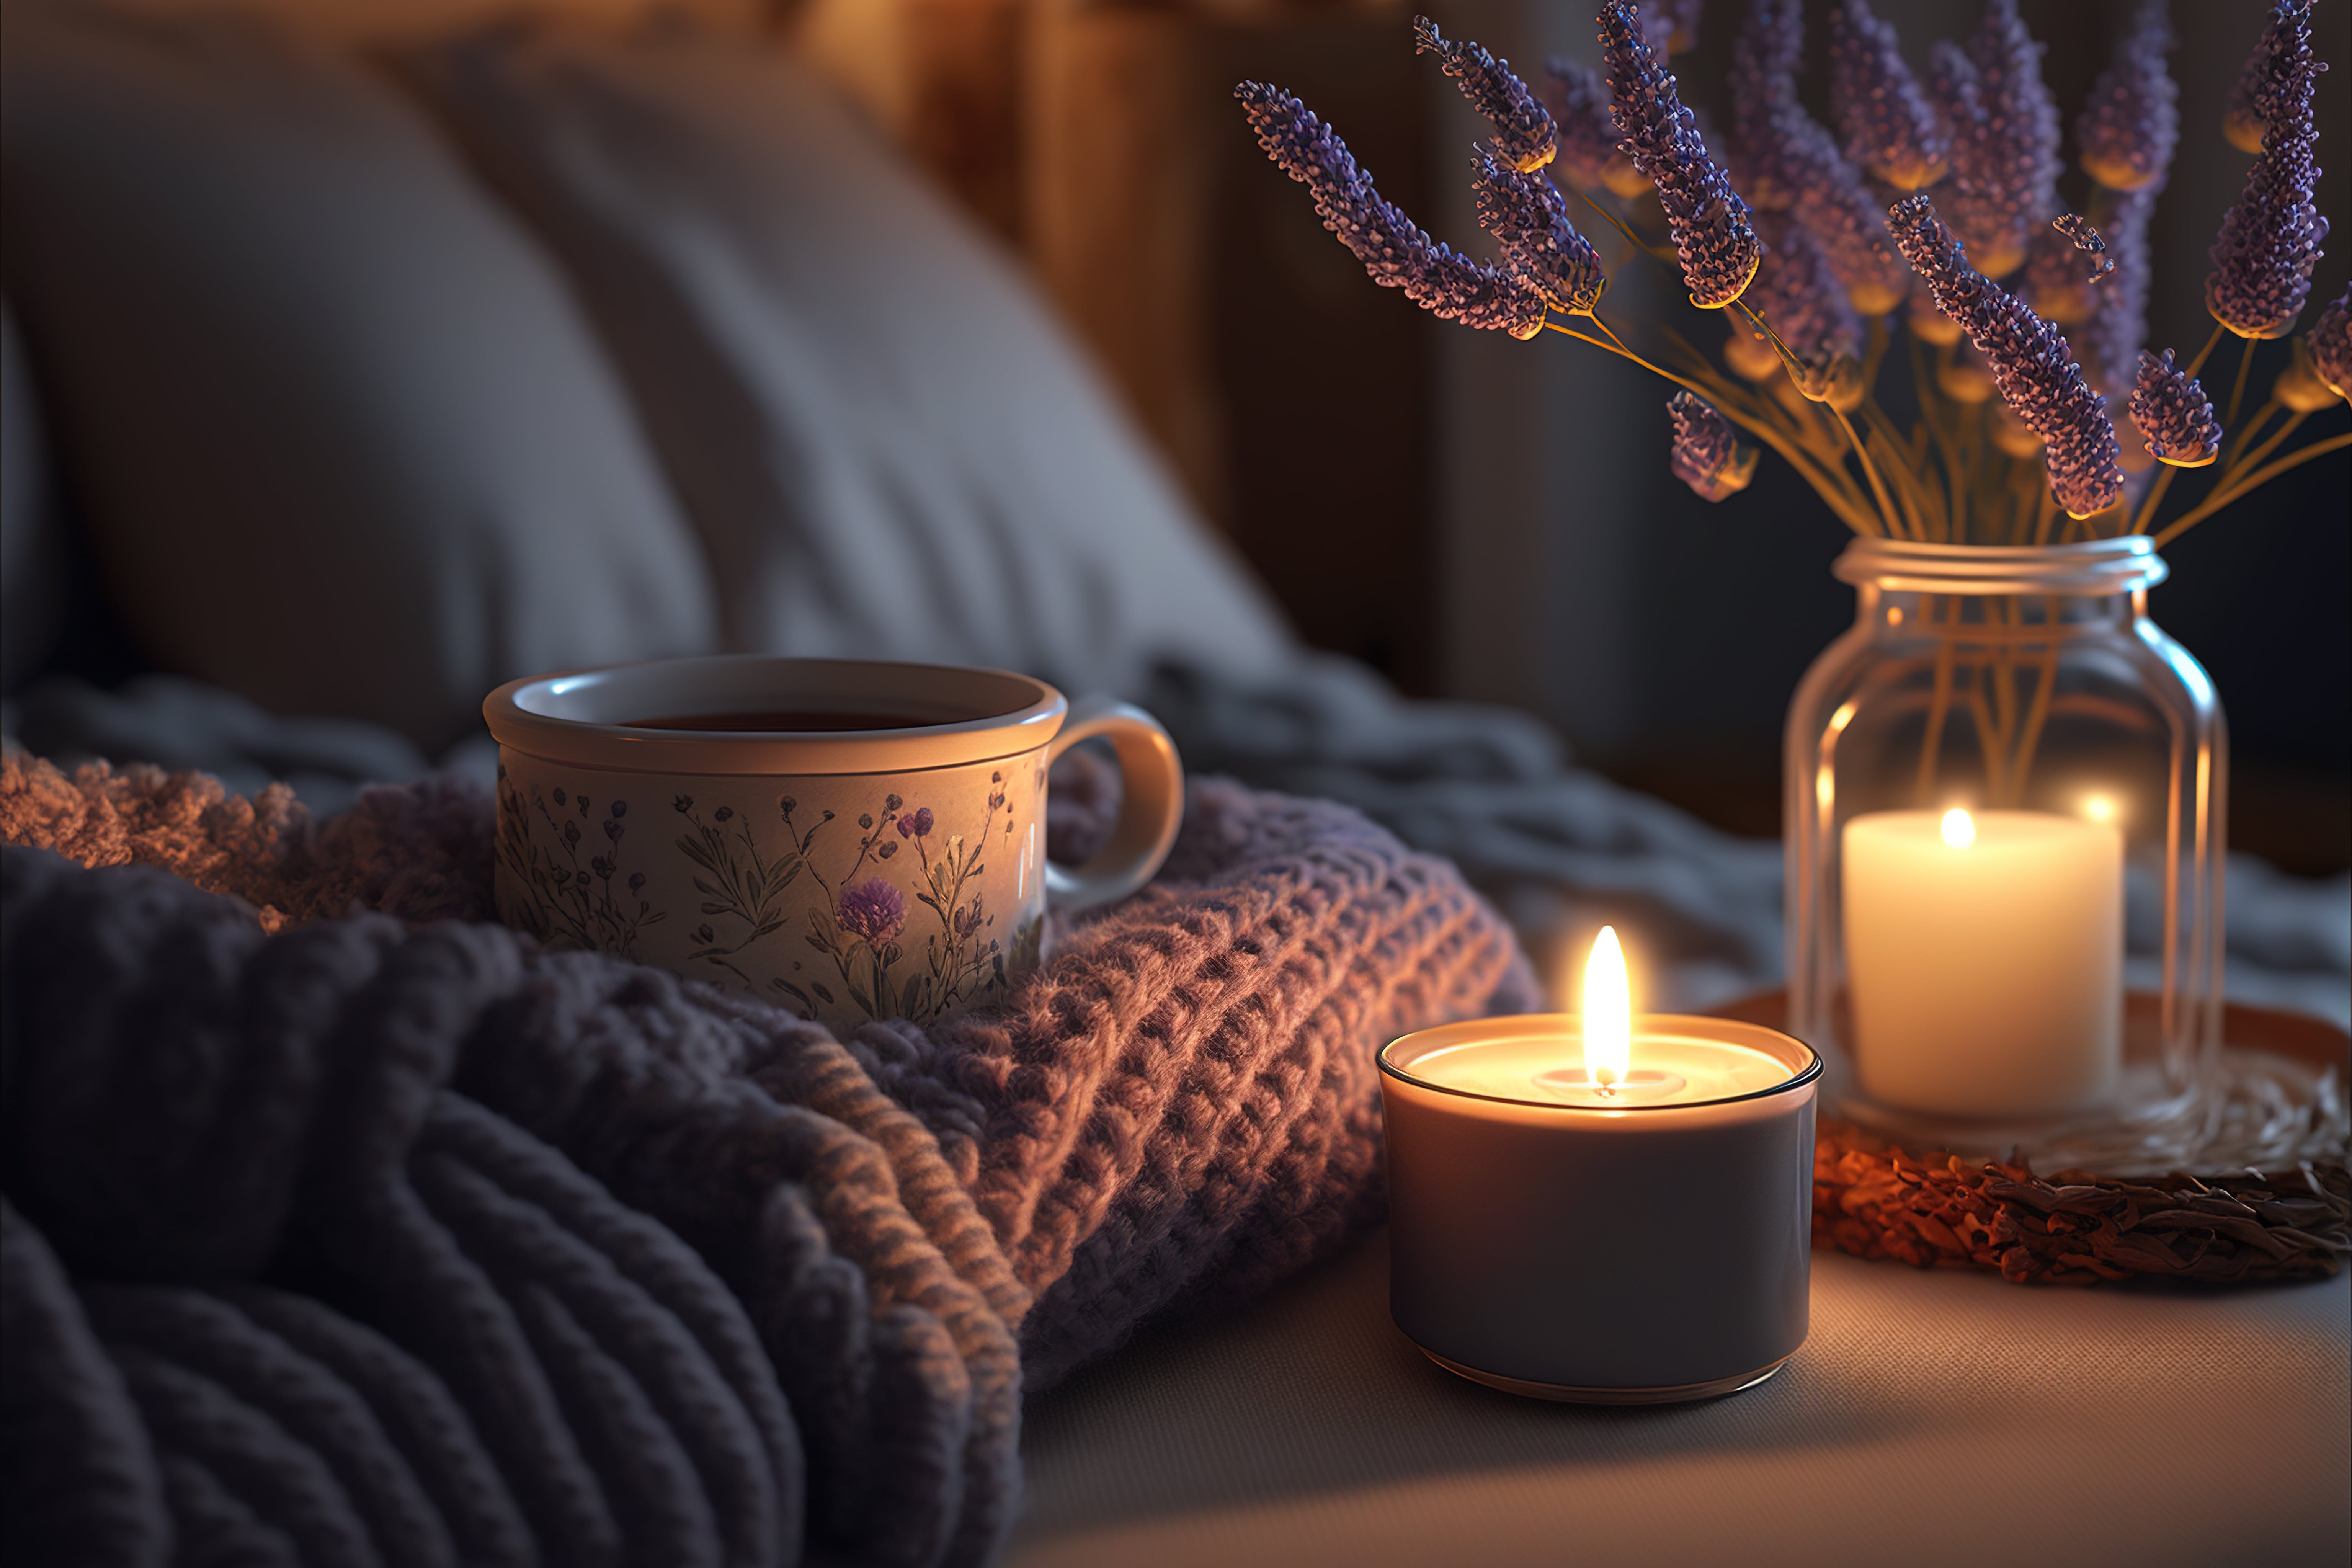 A candlelit bedside table featuring lavender and a mug of herbal tea. A purple bedspread lies on an empty bed in the background